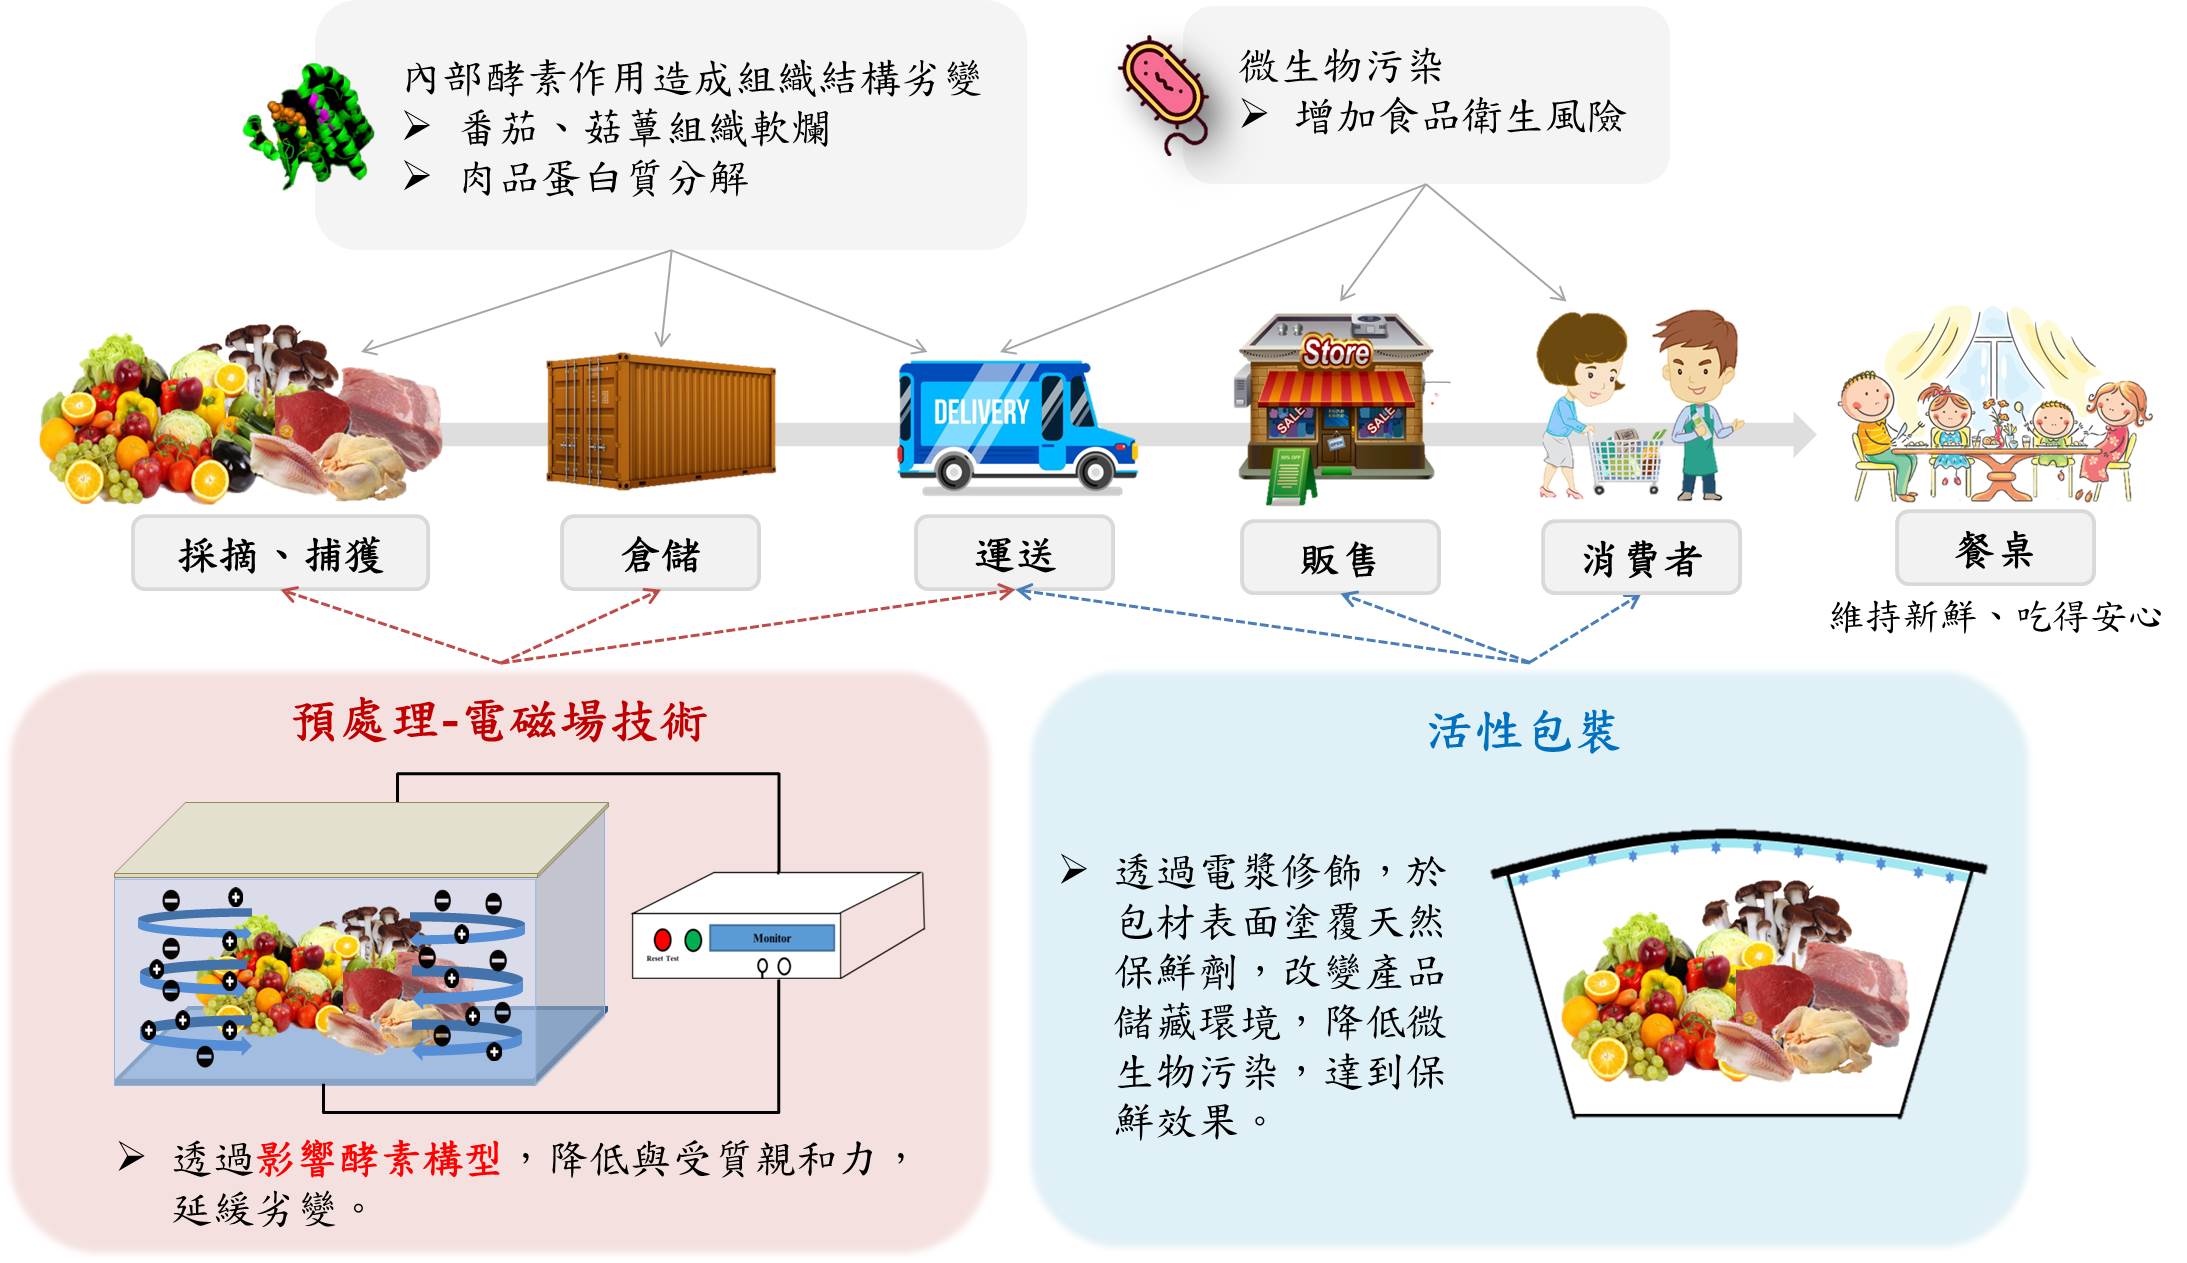 Electromagnetic field technology combined with active packaging application for food preservation